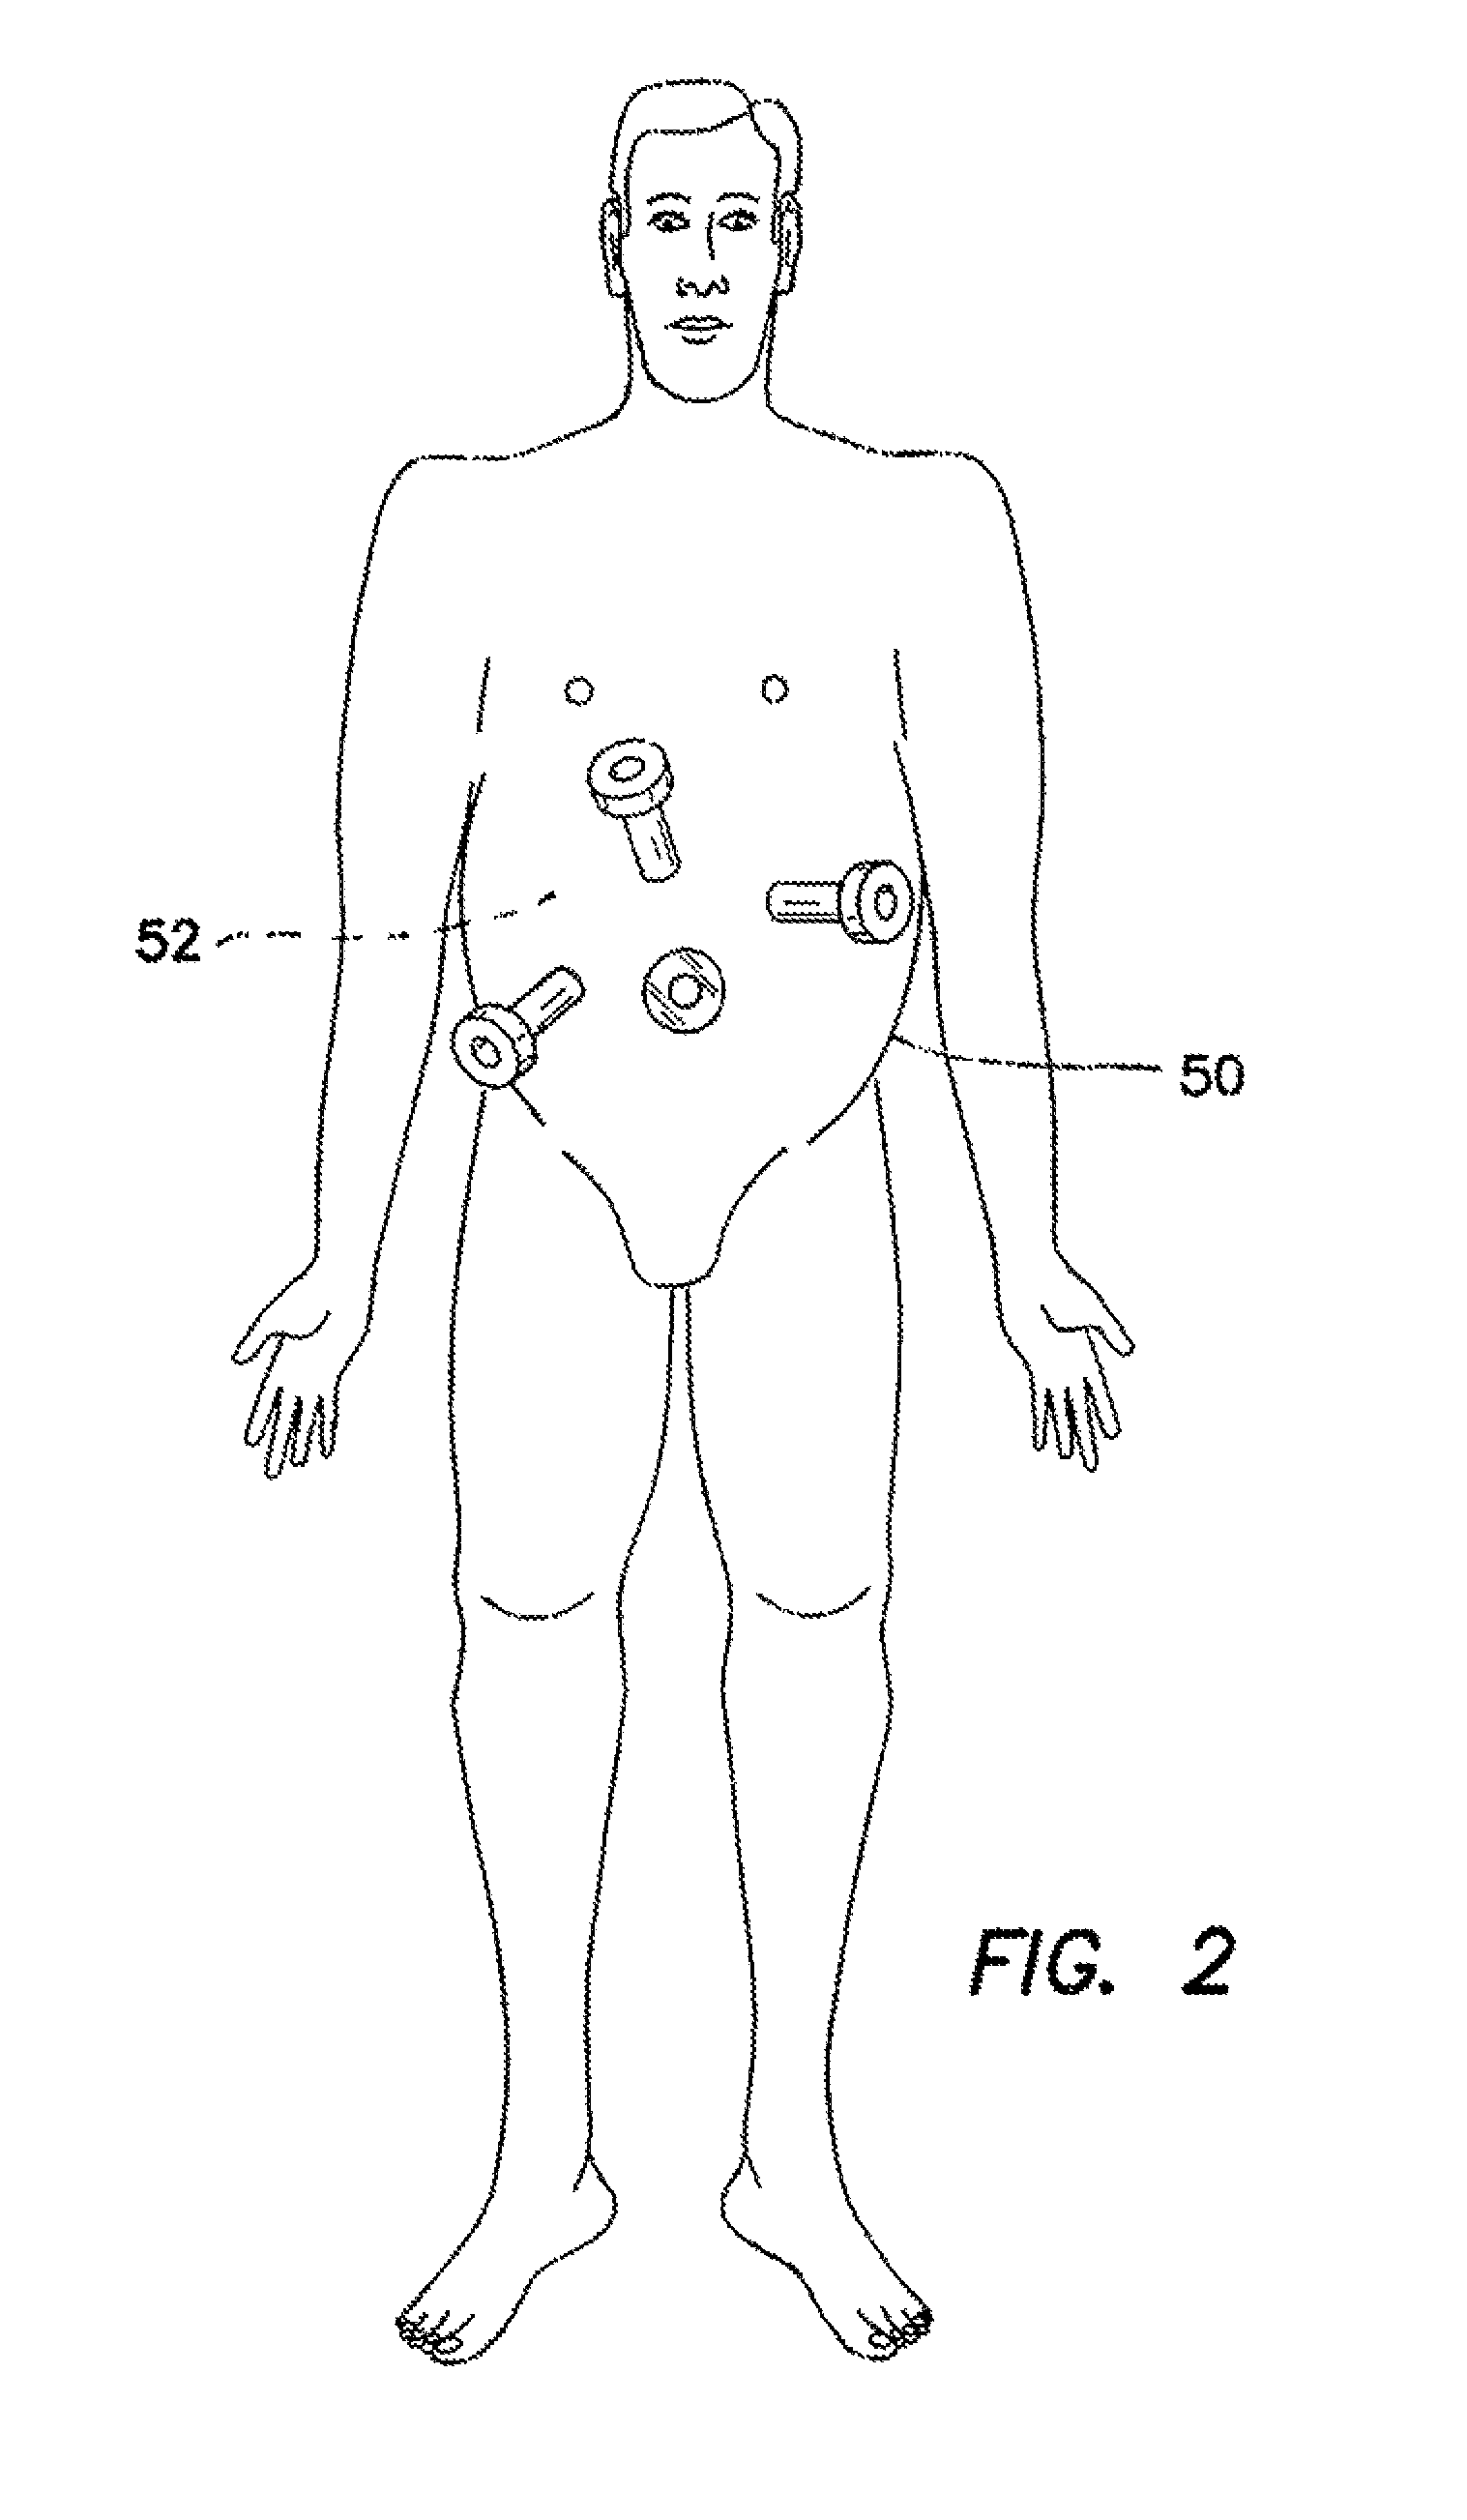 Trocar cannula assembly and method of manufacture